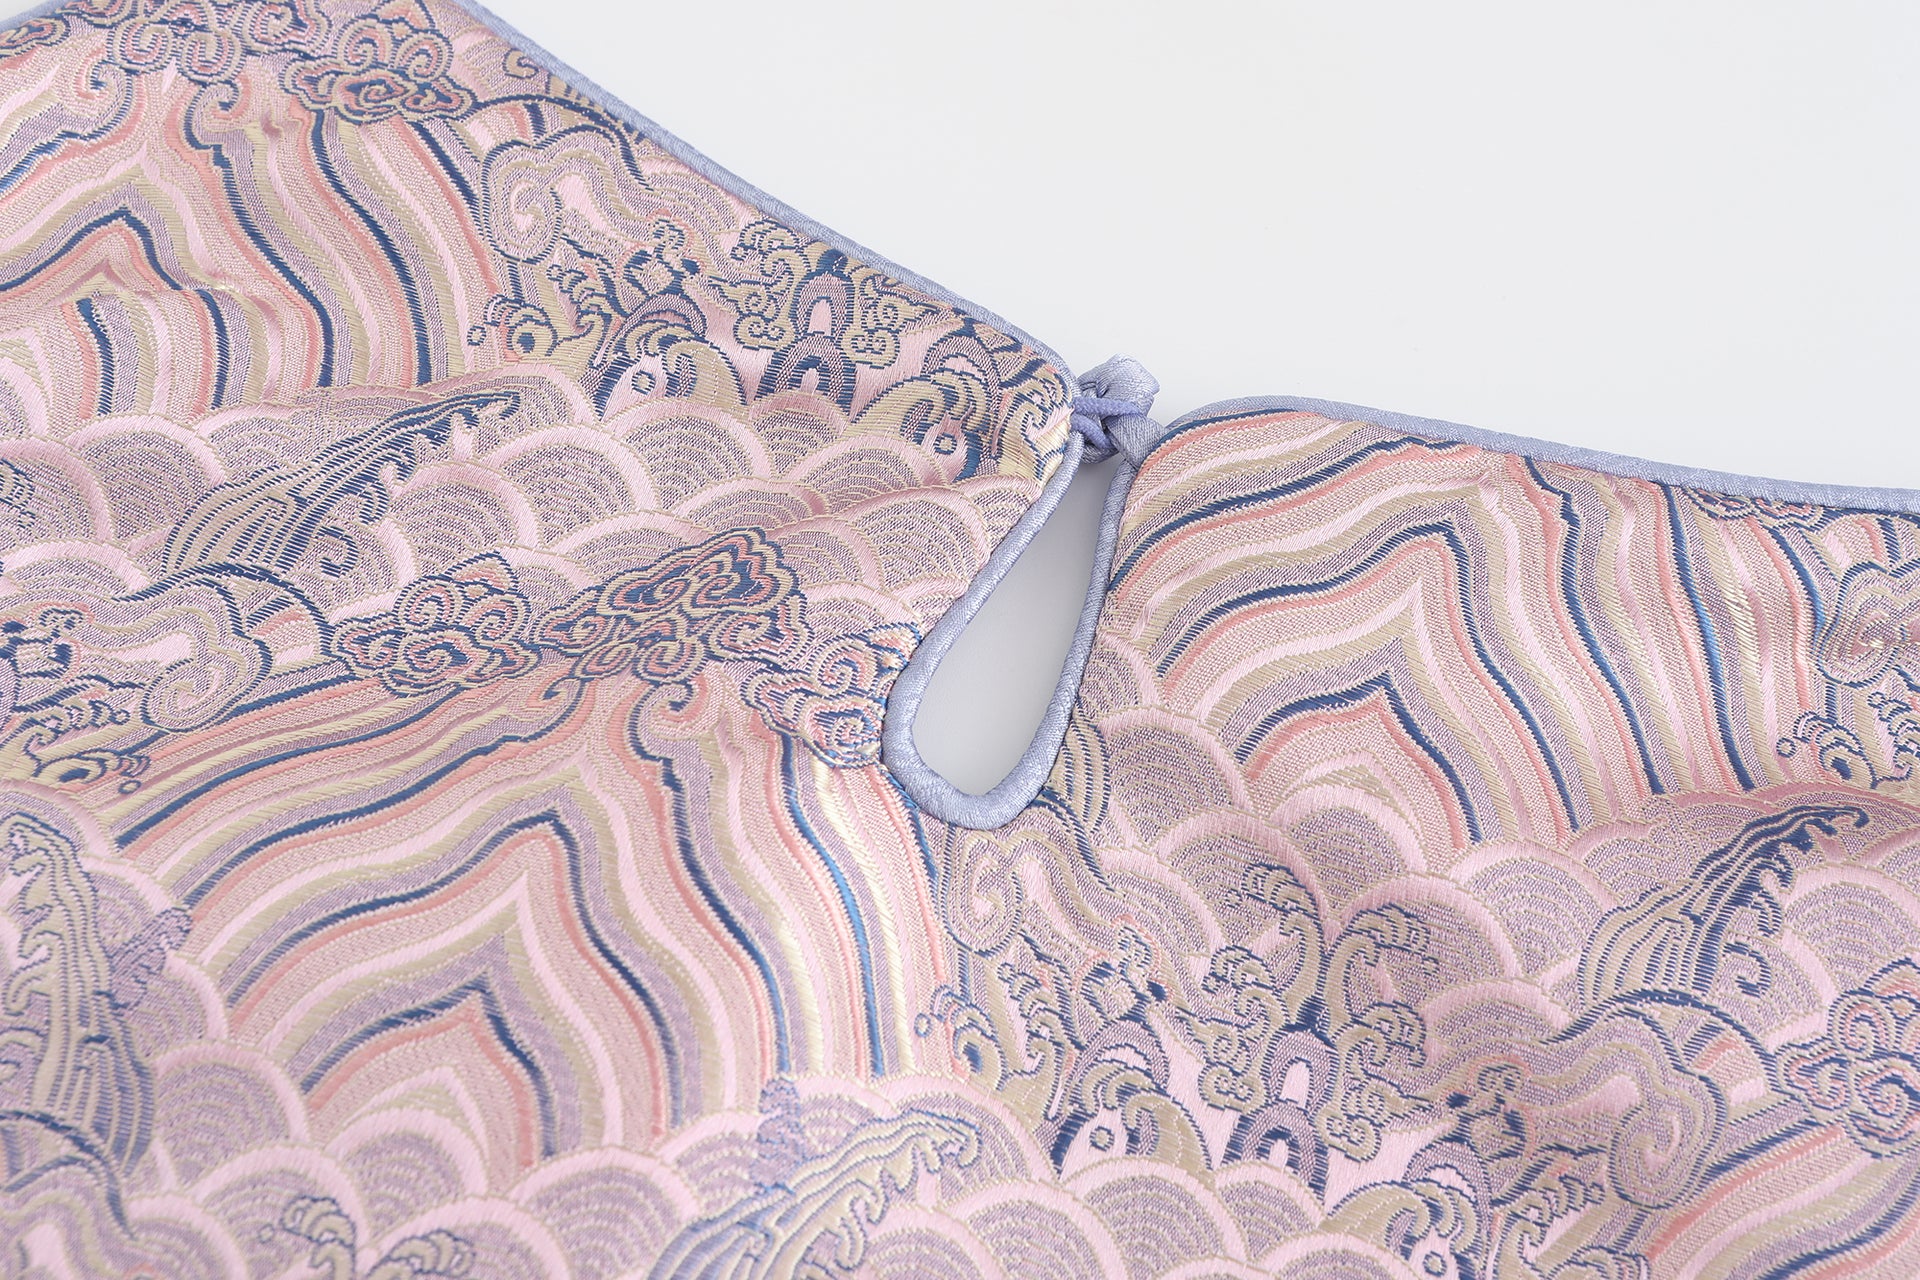 Dong Cropped Reversible Apron Top, Silk Brocade Fabric, periwinkle pink, button closeup